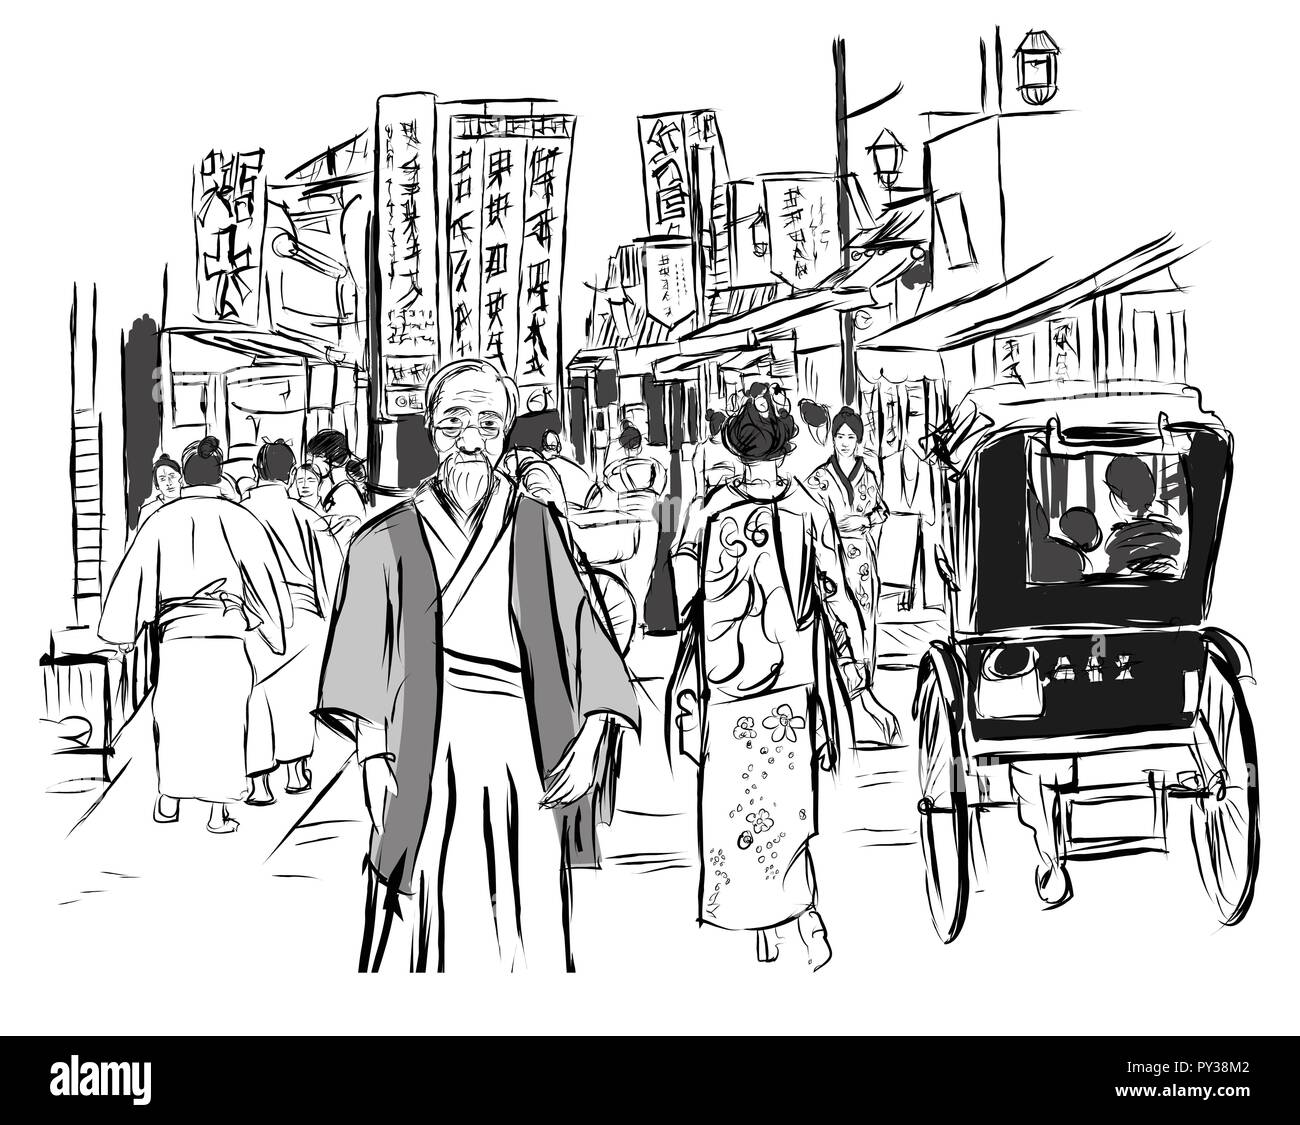 Street in Tokyo with people in traditional dress - vector illustration (all the characters and sign are fictitious) Stock Vector